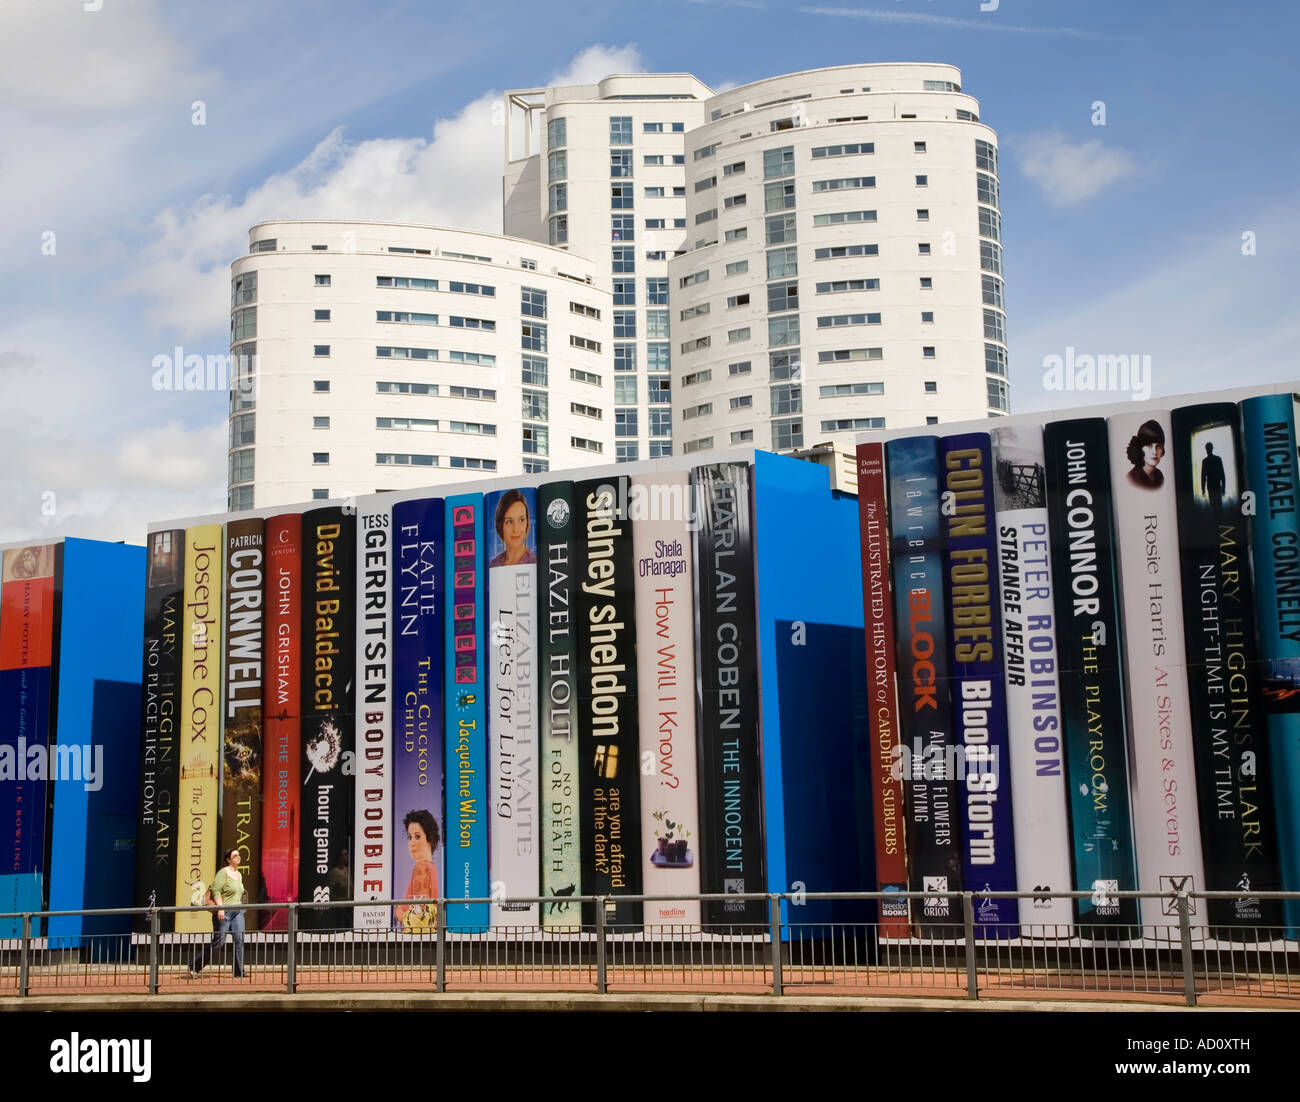 Woman walking past representation of large books on shelf the facade of the central library Cardiff Wales UK Stock Photo